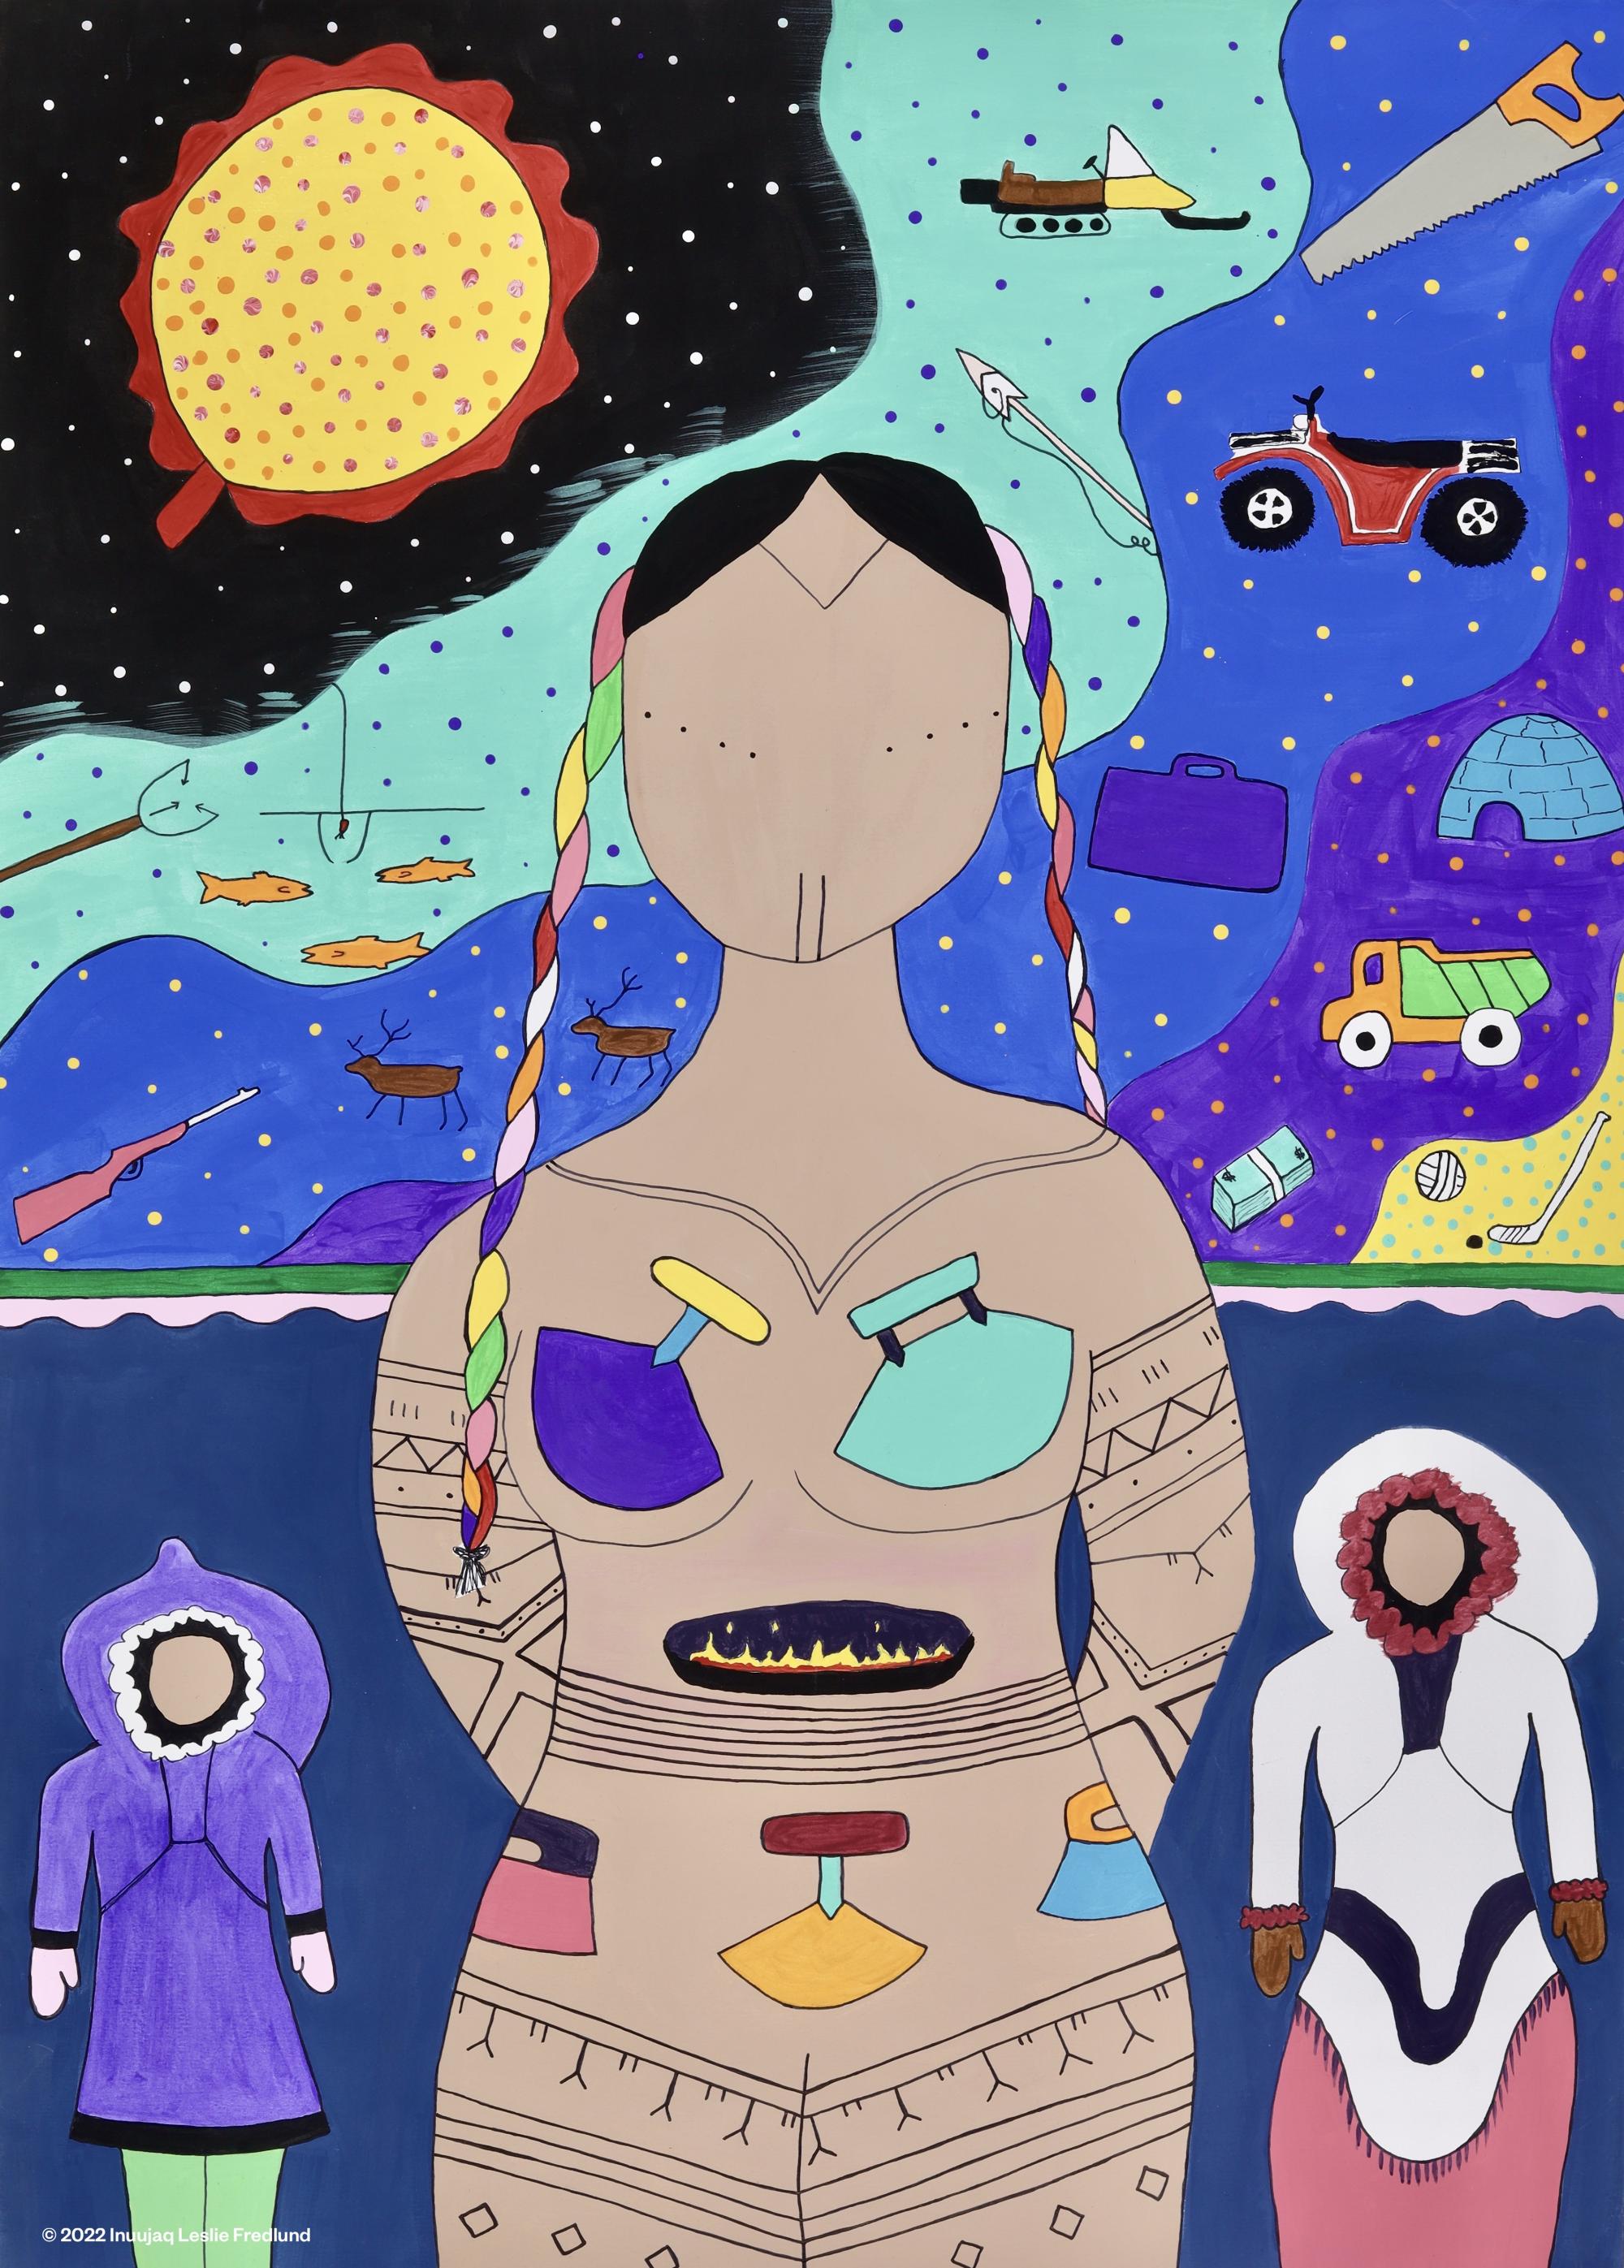 Acyrlic on paper of 3 figures in the foreground wearing and displaying various Inuit symbols and items such as uluit and amautiit. The sky in the background is black, teal, blue, purple and yellow with illustrations like a 4-wheeler, igloo, and saw